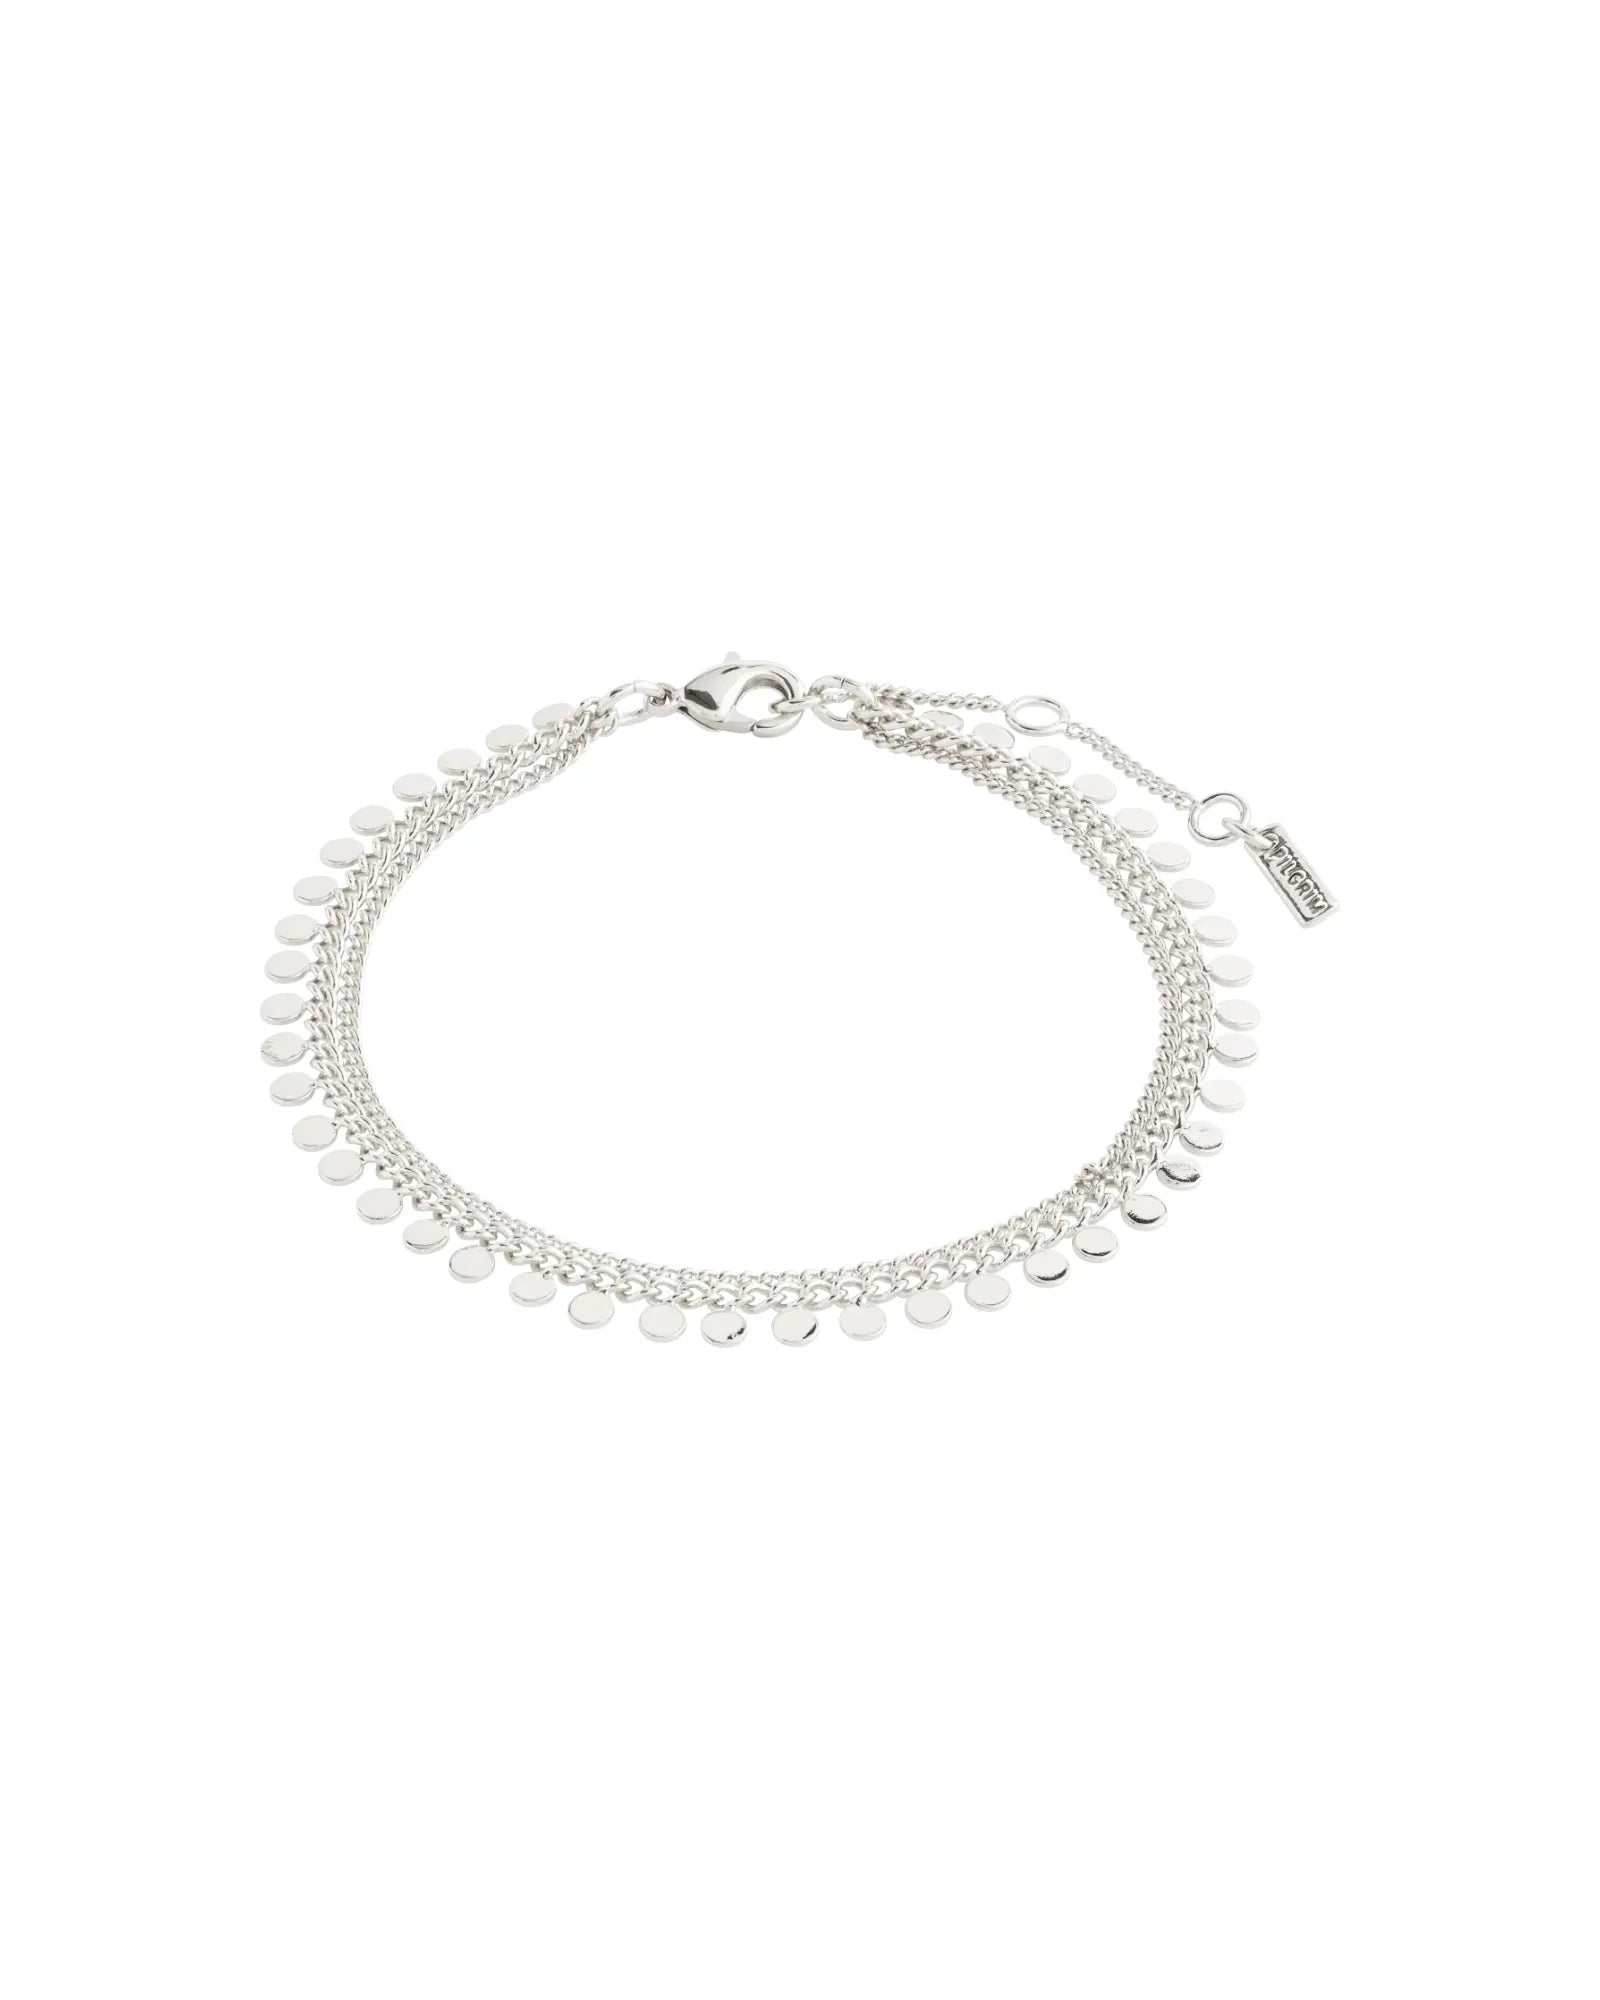 BLOOM Recycled Bracelet - Silver Plated